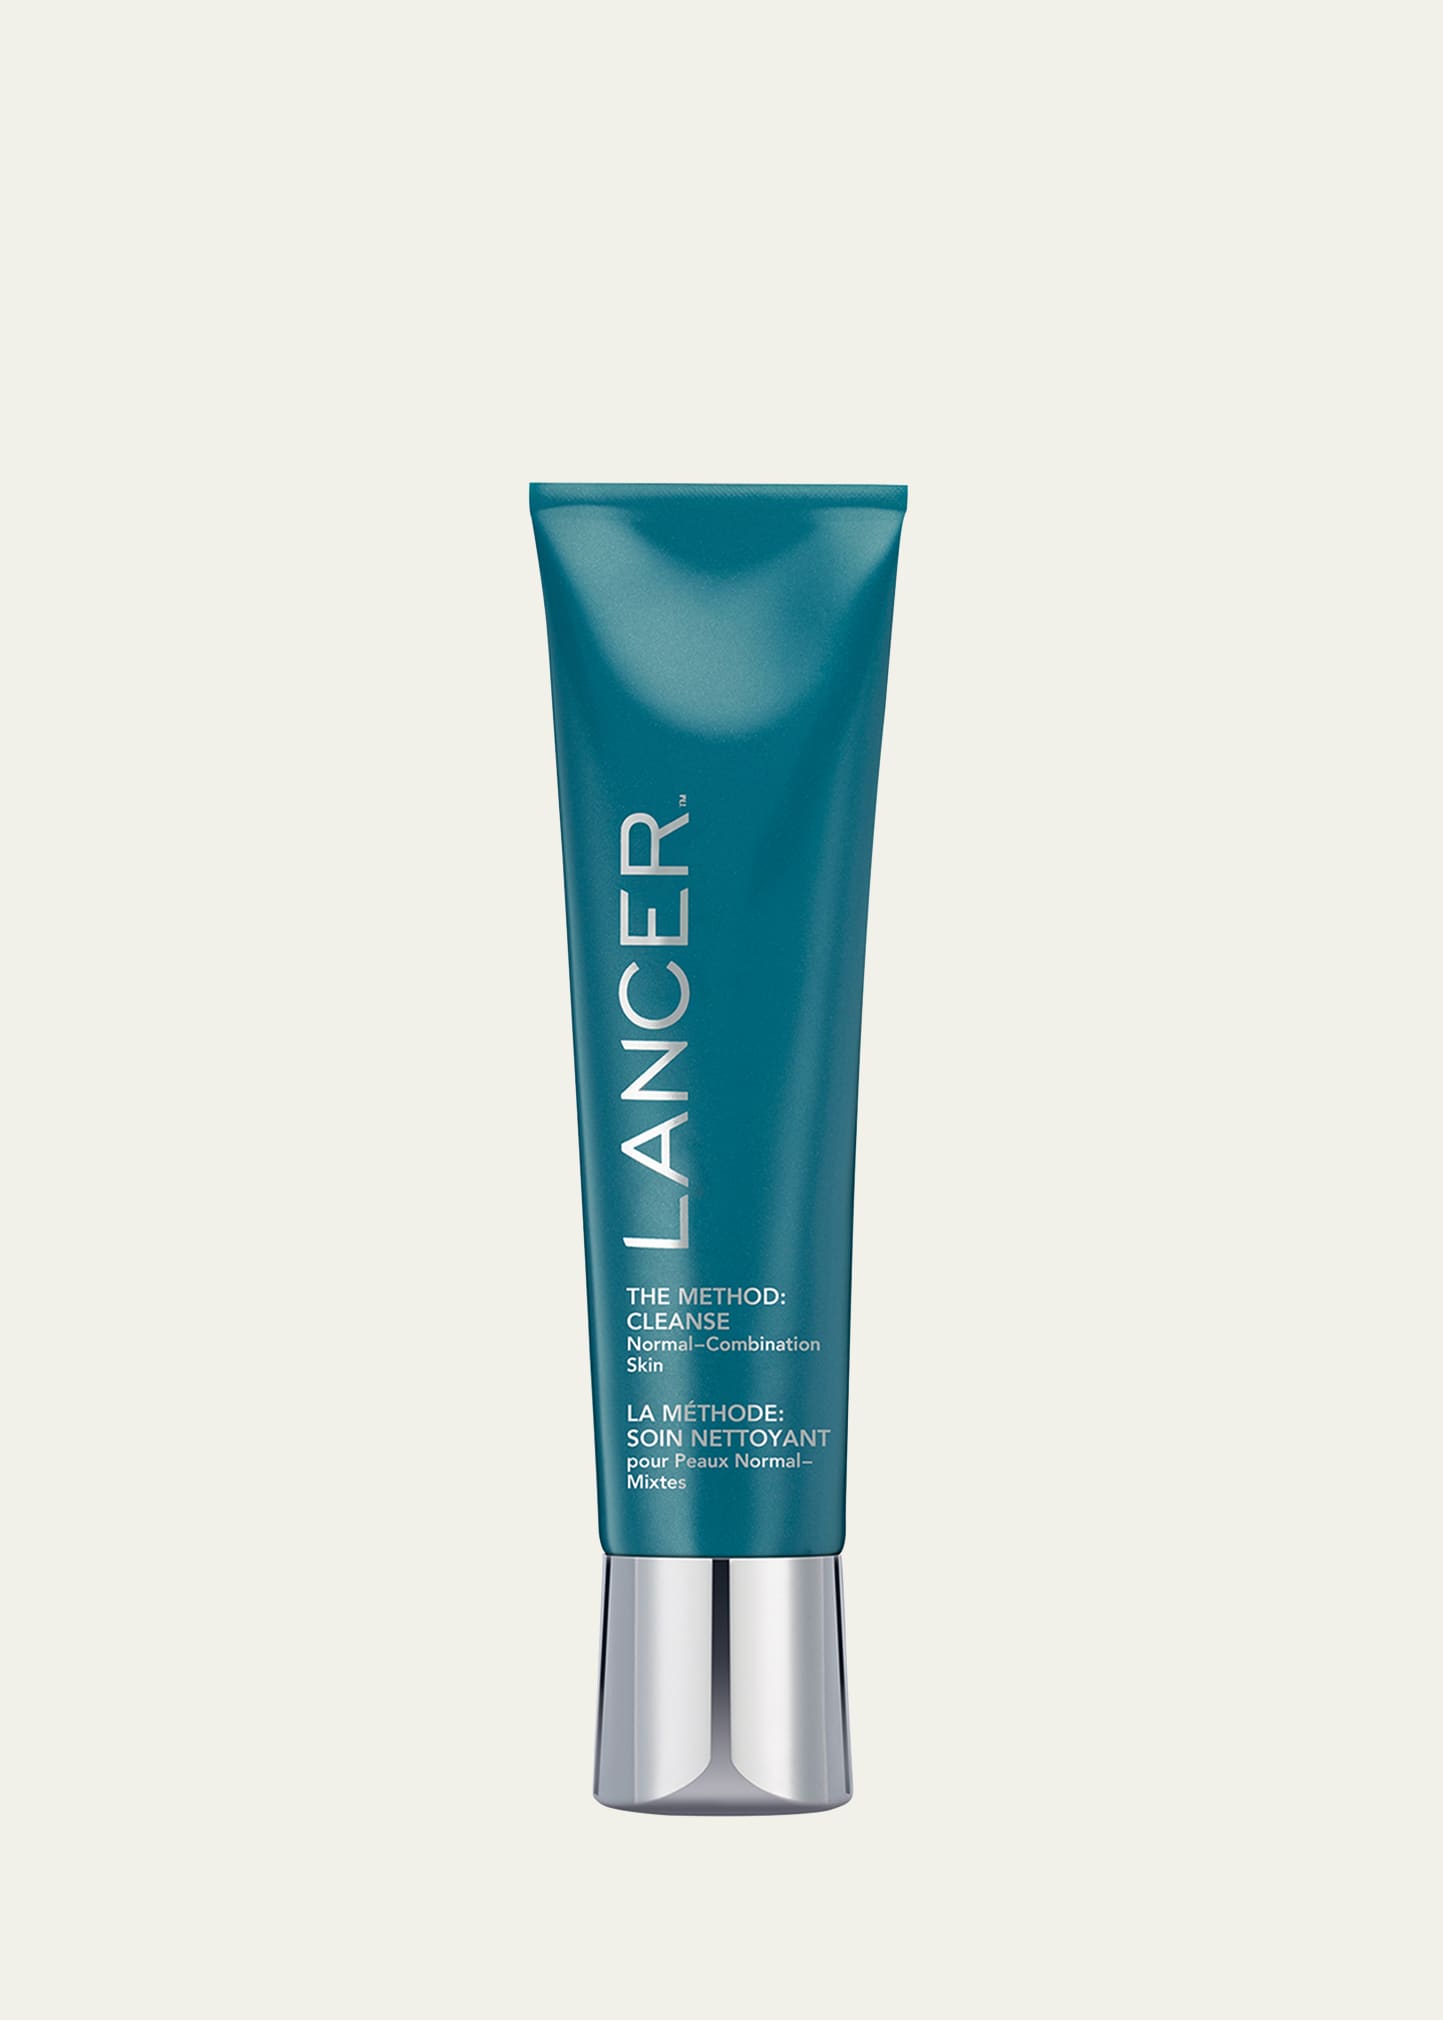 Lancer The Method: Cleanse Normal-Combination Skin, 4 oz.